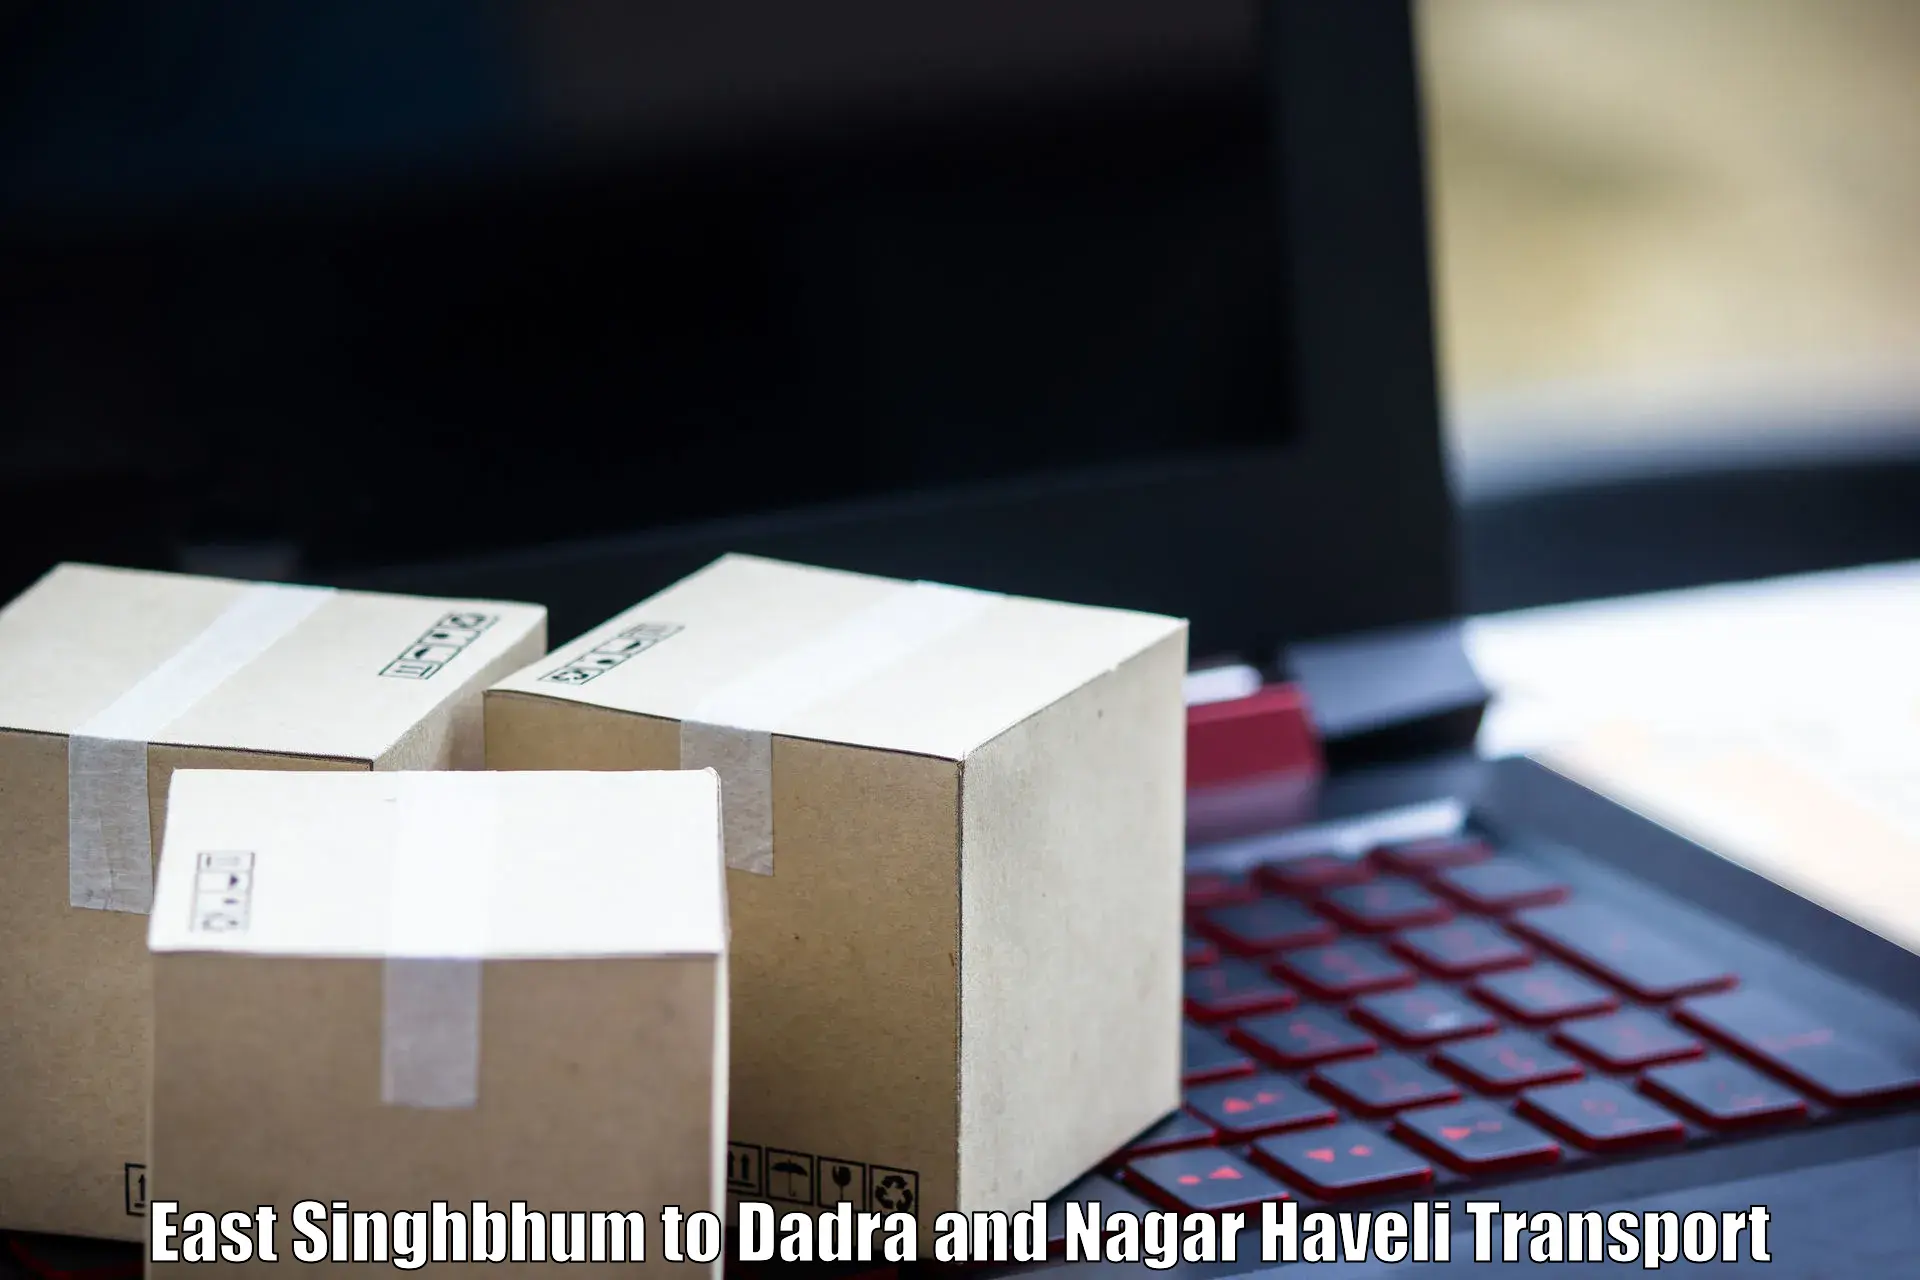 Best transport services in India East Singhbhum to Dadra and Nagar Haveli